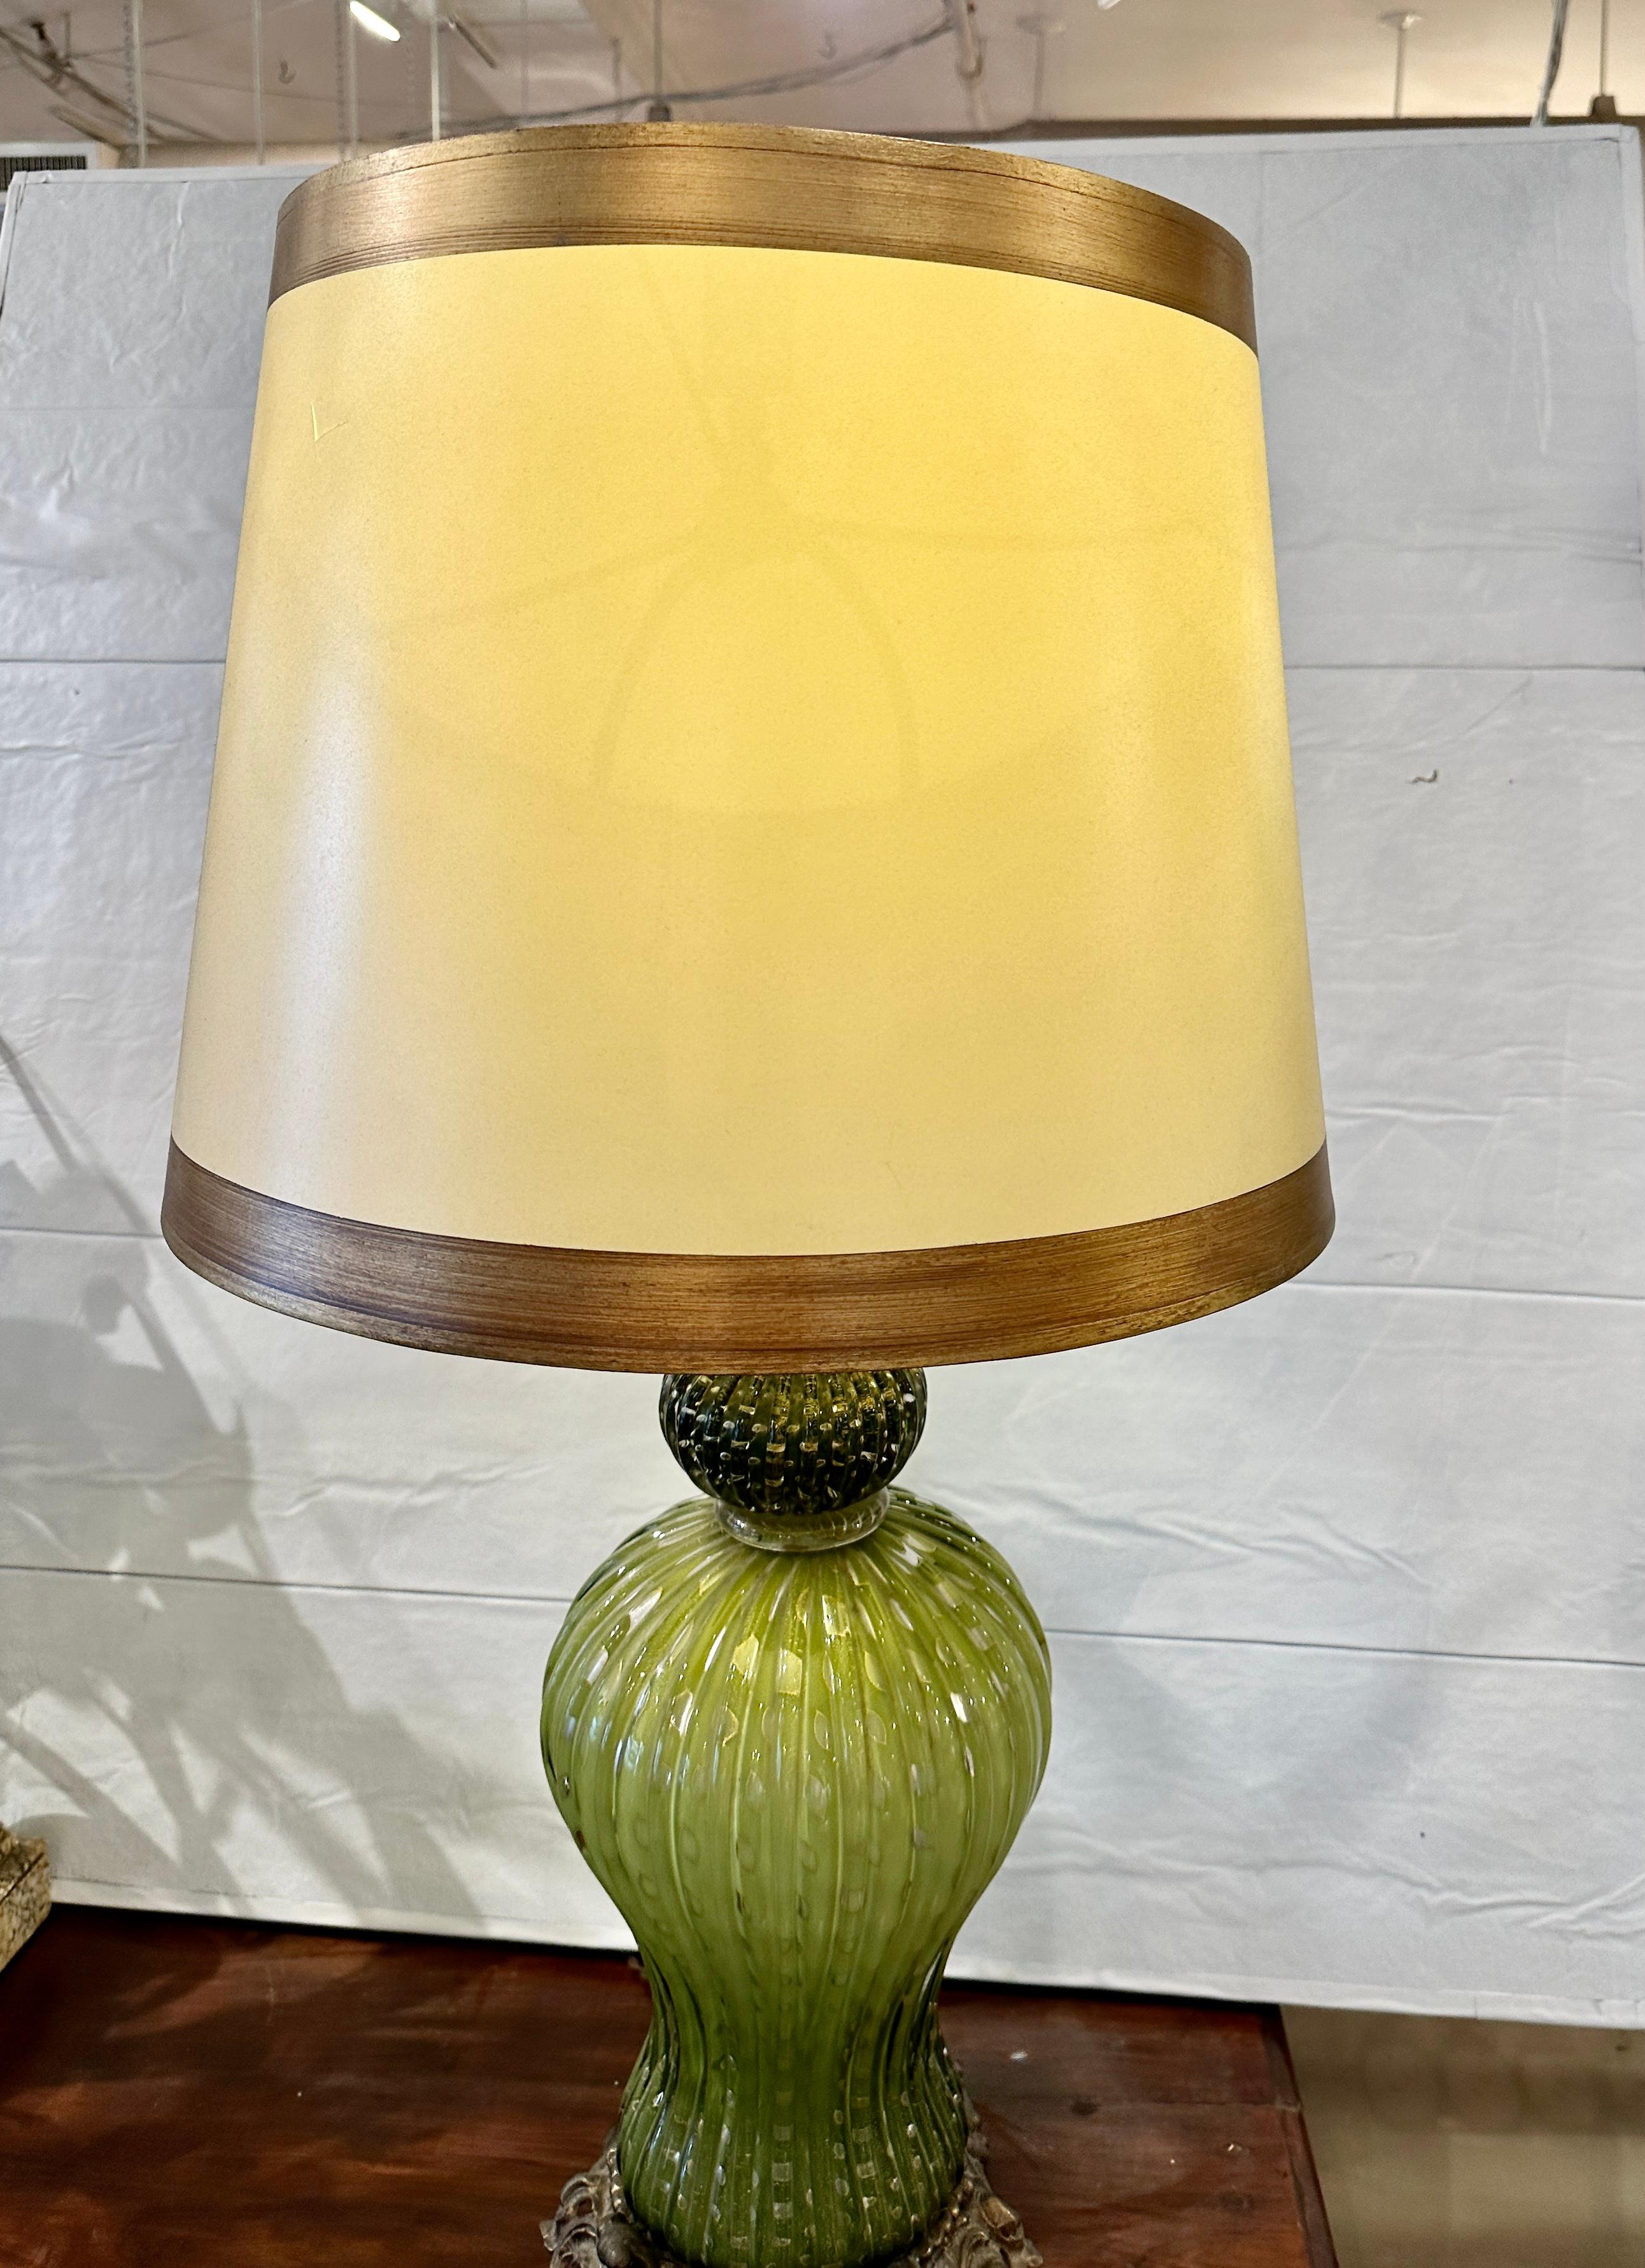 Large Vintage Murano Glass Lamp In Good Condition For Sale In Summerland, CA